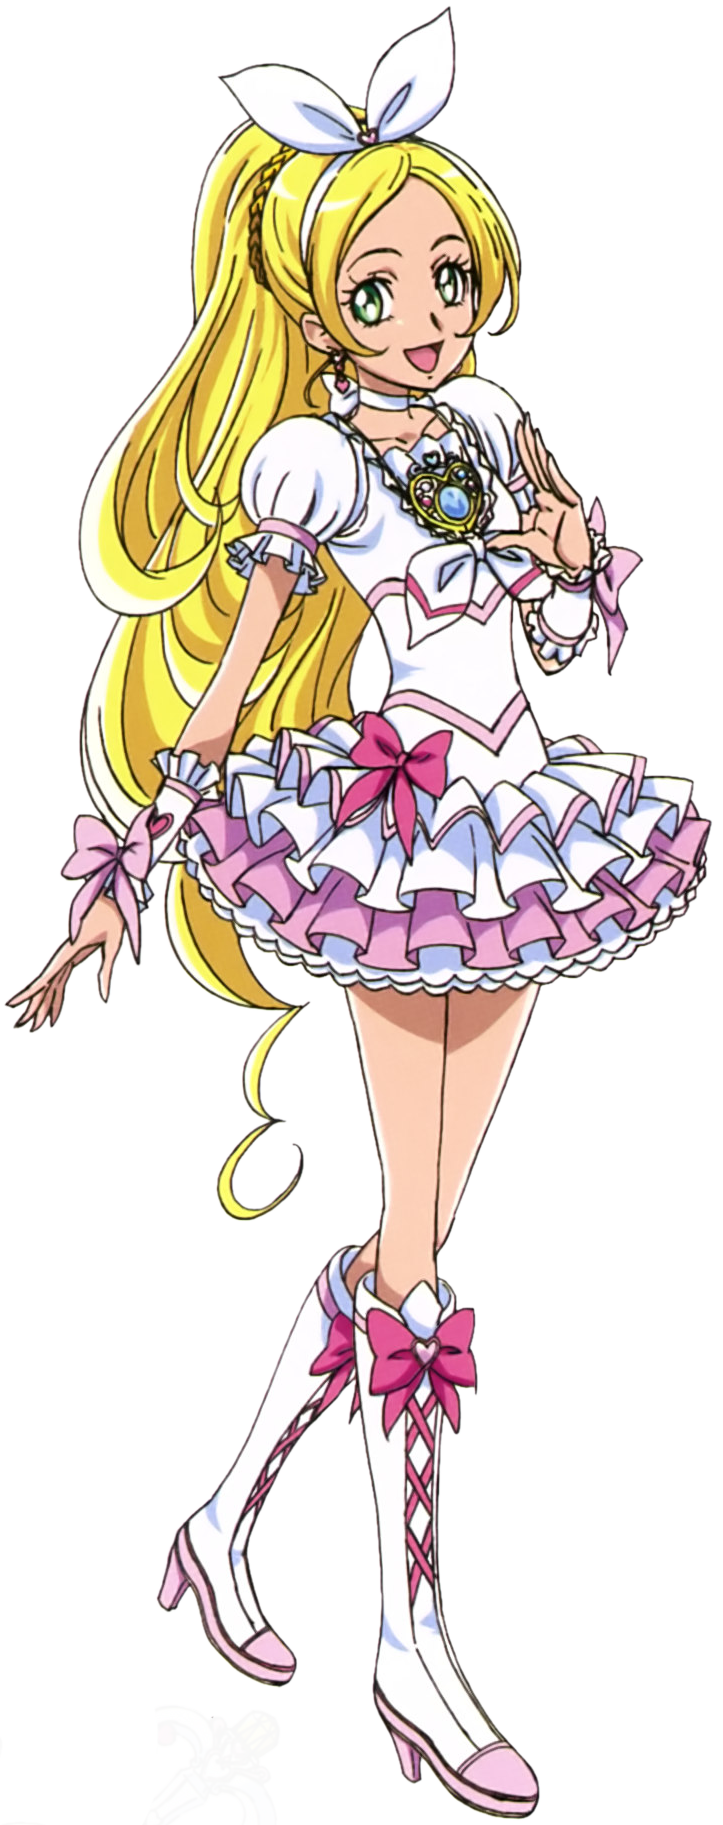 Image Suite Pretty Cure Cure Rhythm Pose5png Magical Girl Mahou Shoujo 魔法少女 Wiki 1782